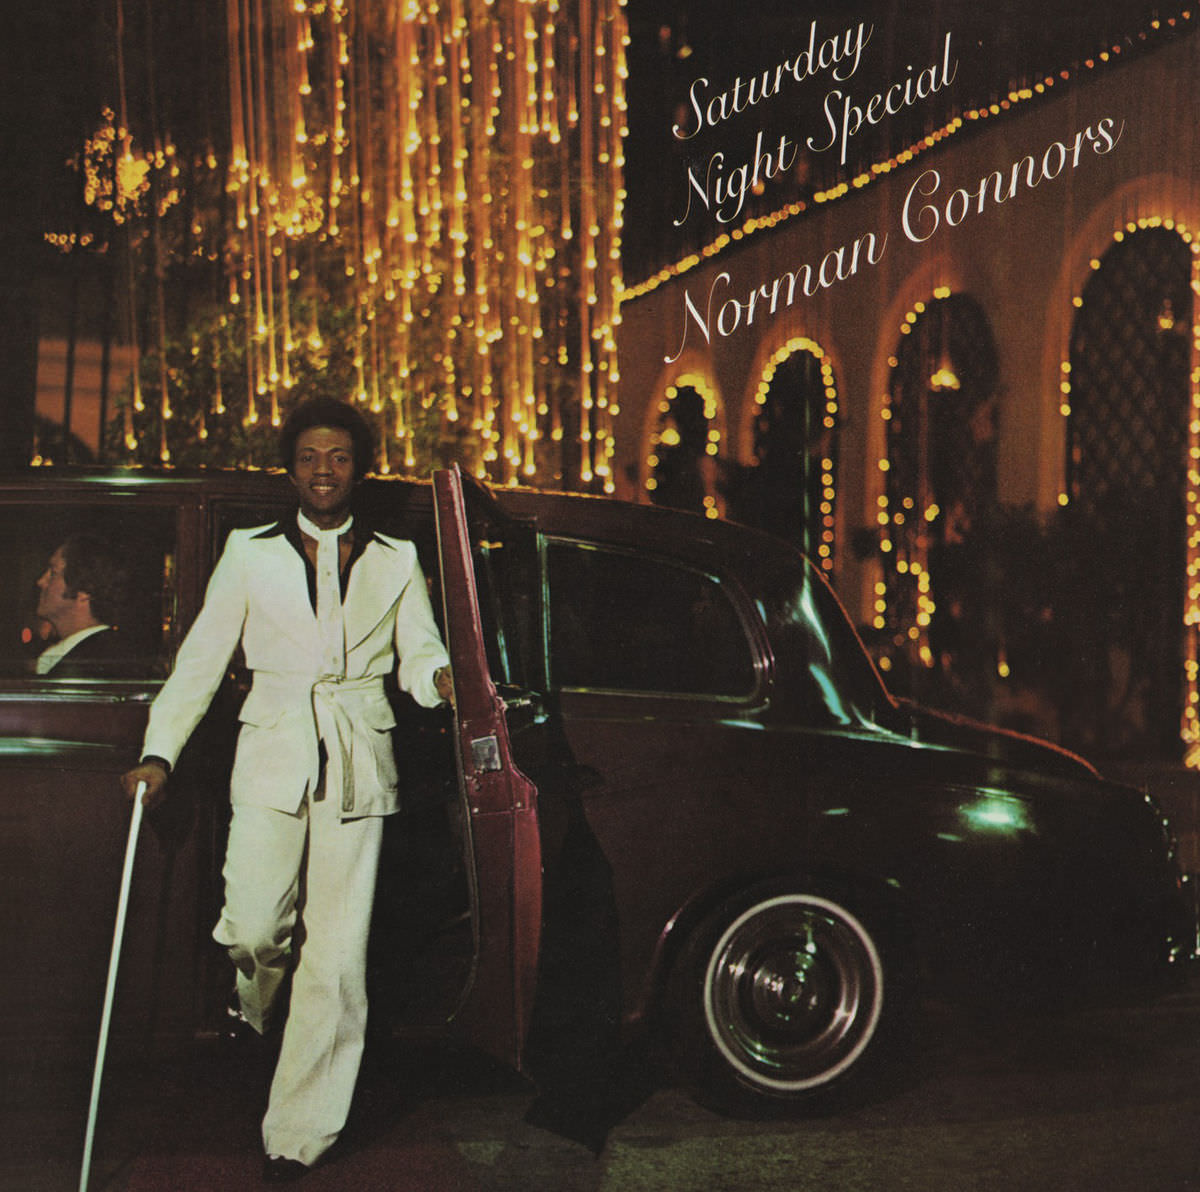 Norman Connors - Saturday Night Special (Expanded Edition) (1976/2015) [FLAC 24bit/96kHz]